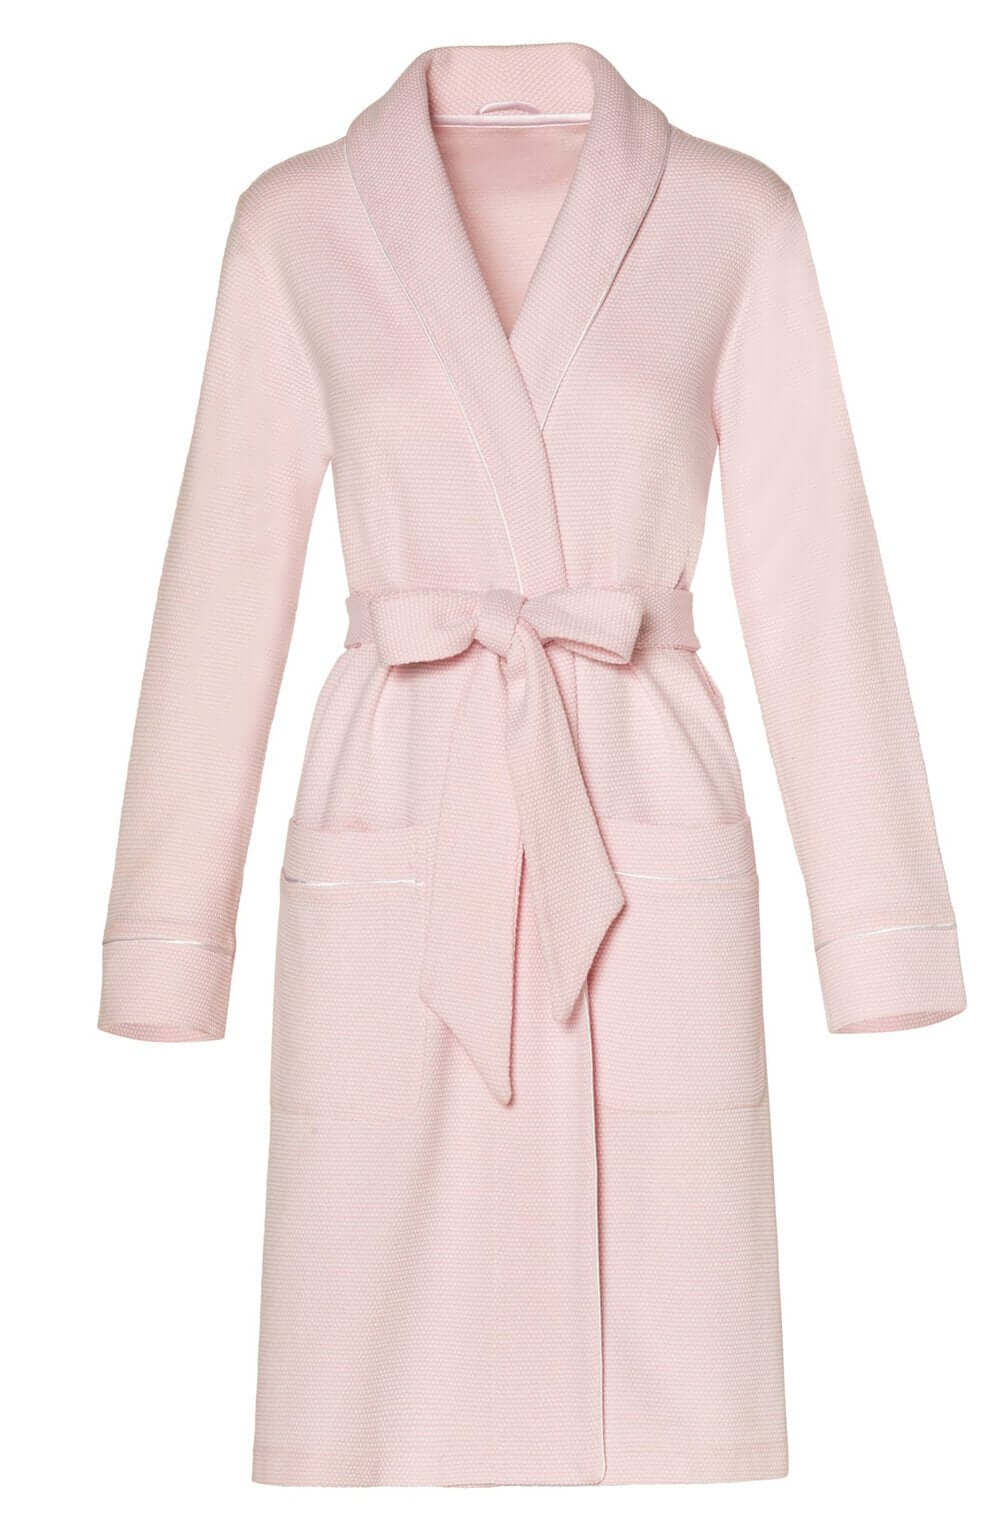 Marelle Grace Long Sleeve Short Robe Color: Pink Size: Medium at Petticoat Lane  Greenwich, CT